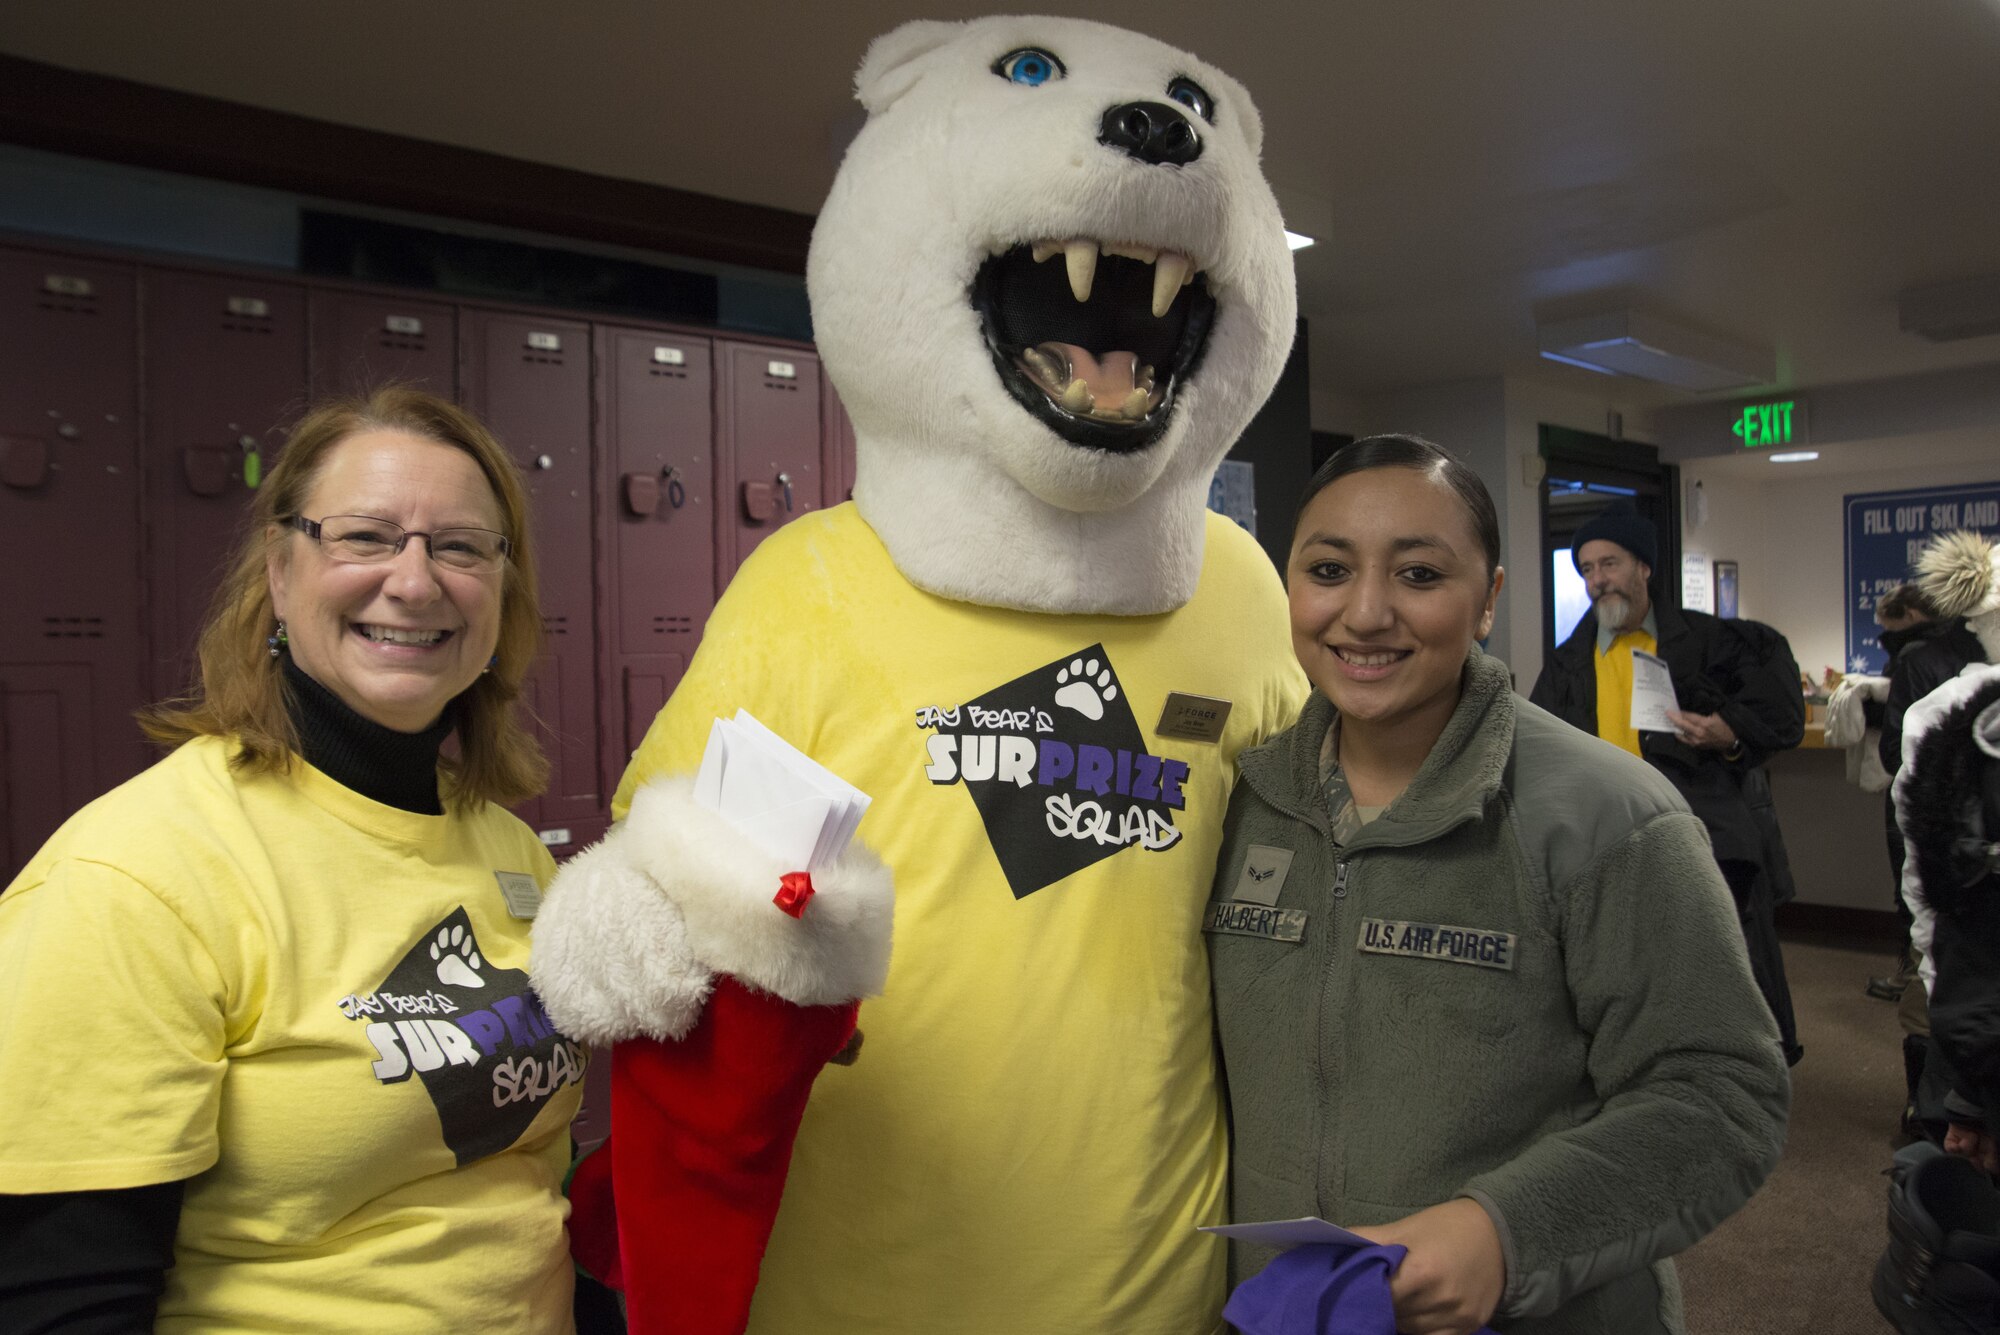 Airman 1st Class Valerie Halbert (right), 673d Air Base Wing Public Affairs photojournalist, receives a $200 gift card from the Jay Bear’s SurPrize Squad at the Hillberg Ski Area during Winterfest at Joint Base Elmendorf-Richardson, Alaska, Dec. 21, 2017. Winterfest was a winter solstice celebration hosted by Hillberg for anyone with base access and offered a plethora of events from noon to as late at 8 p.m.